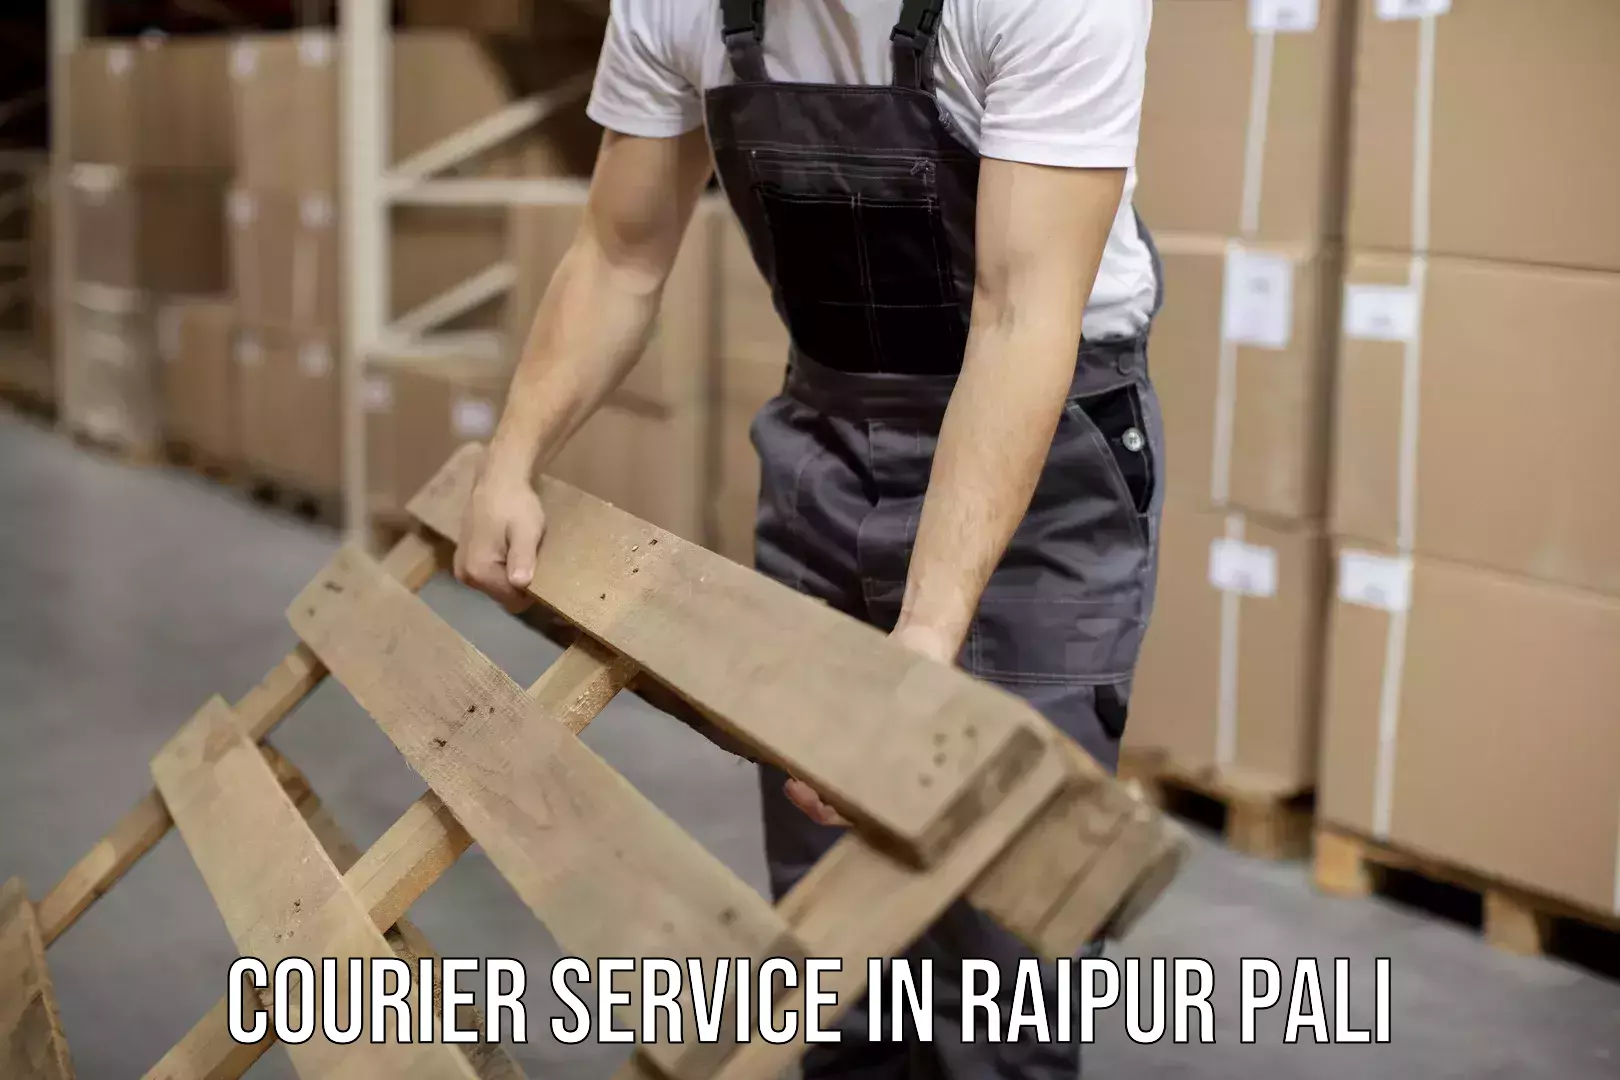 Heavy parcel delivery in Raipur Pali